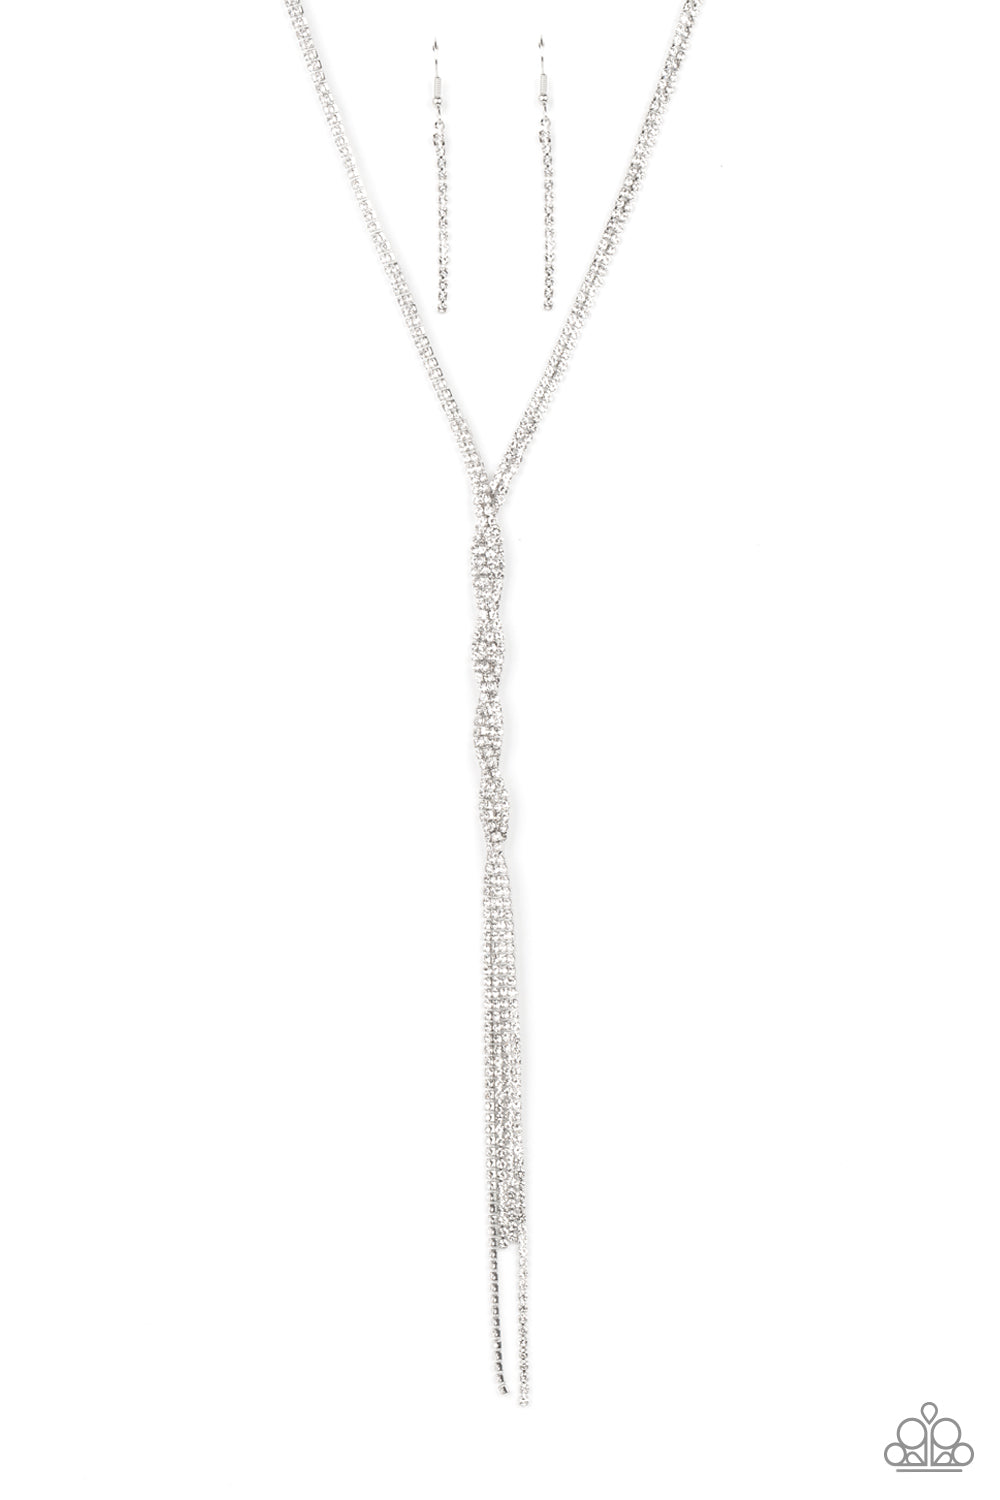 Impressively Icy - White Necklace - Life of the Party Exclusive March 2022